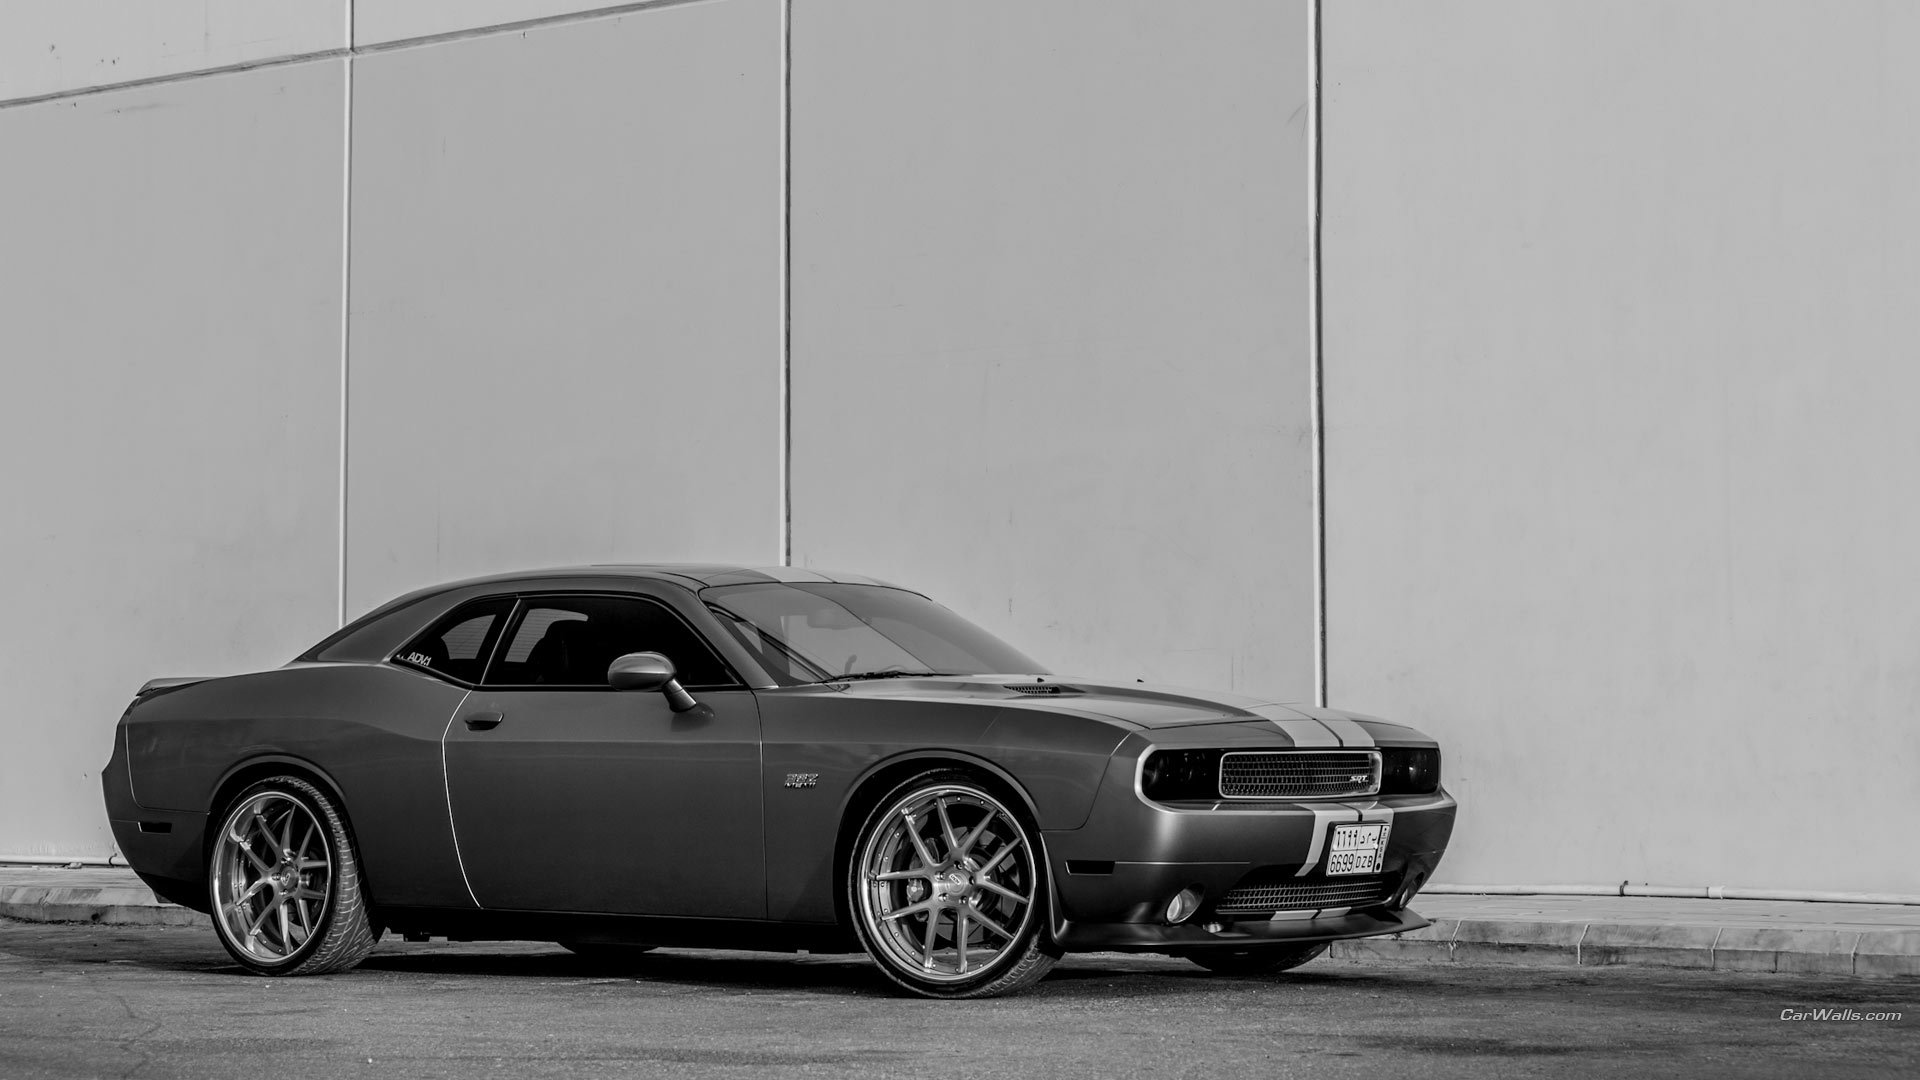 Awesome Dodge Challenger SRT8 free wallpaper ID:445888 for 1080p computer